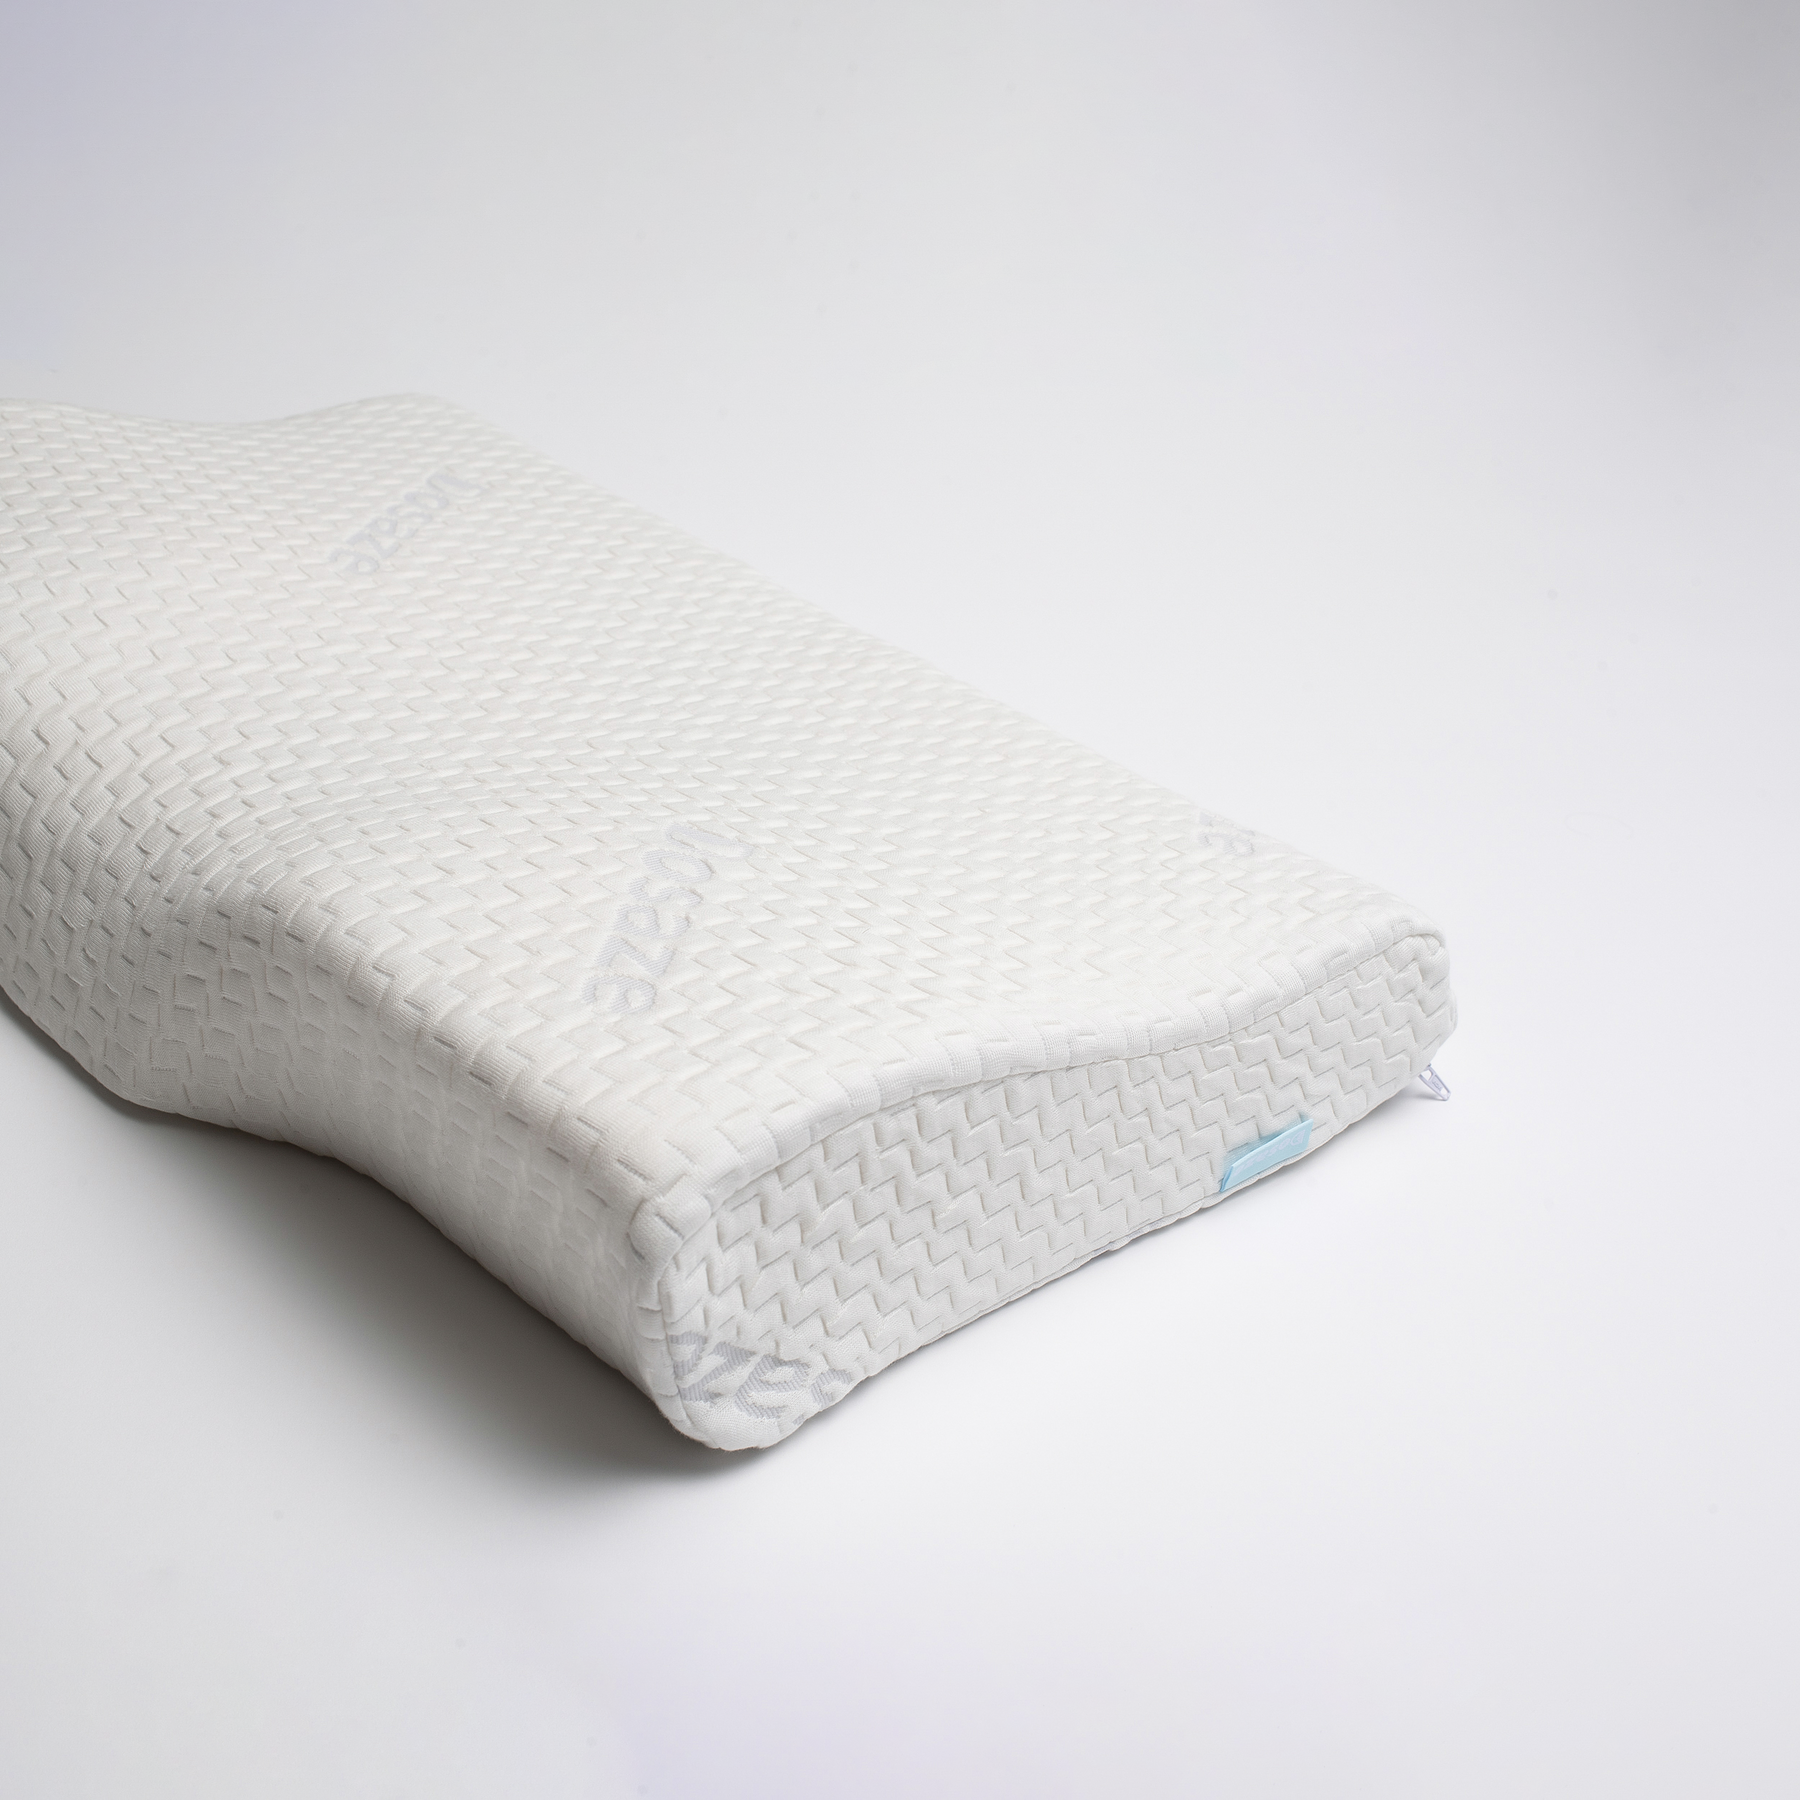 Dosaze™ Therapeutic Cooling Wedge Pillow